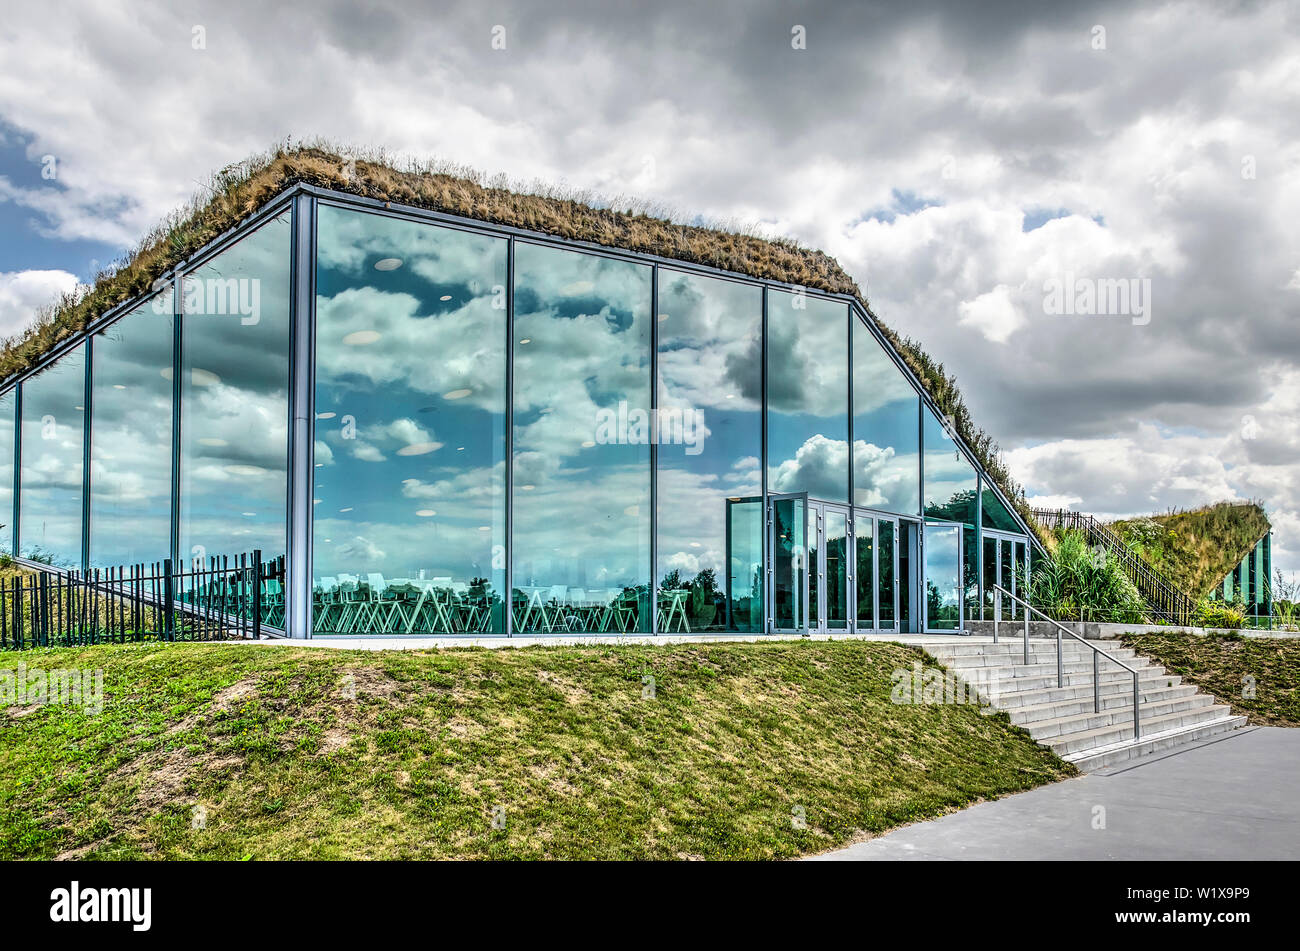 Werkendam, The Netherlands, July 3, 2019: sky with spectacular clouds reflecting in the facade of the museum restaurant in Biesbosch national park Stock Photo